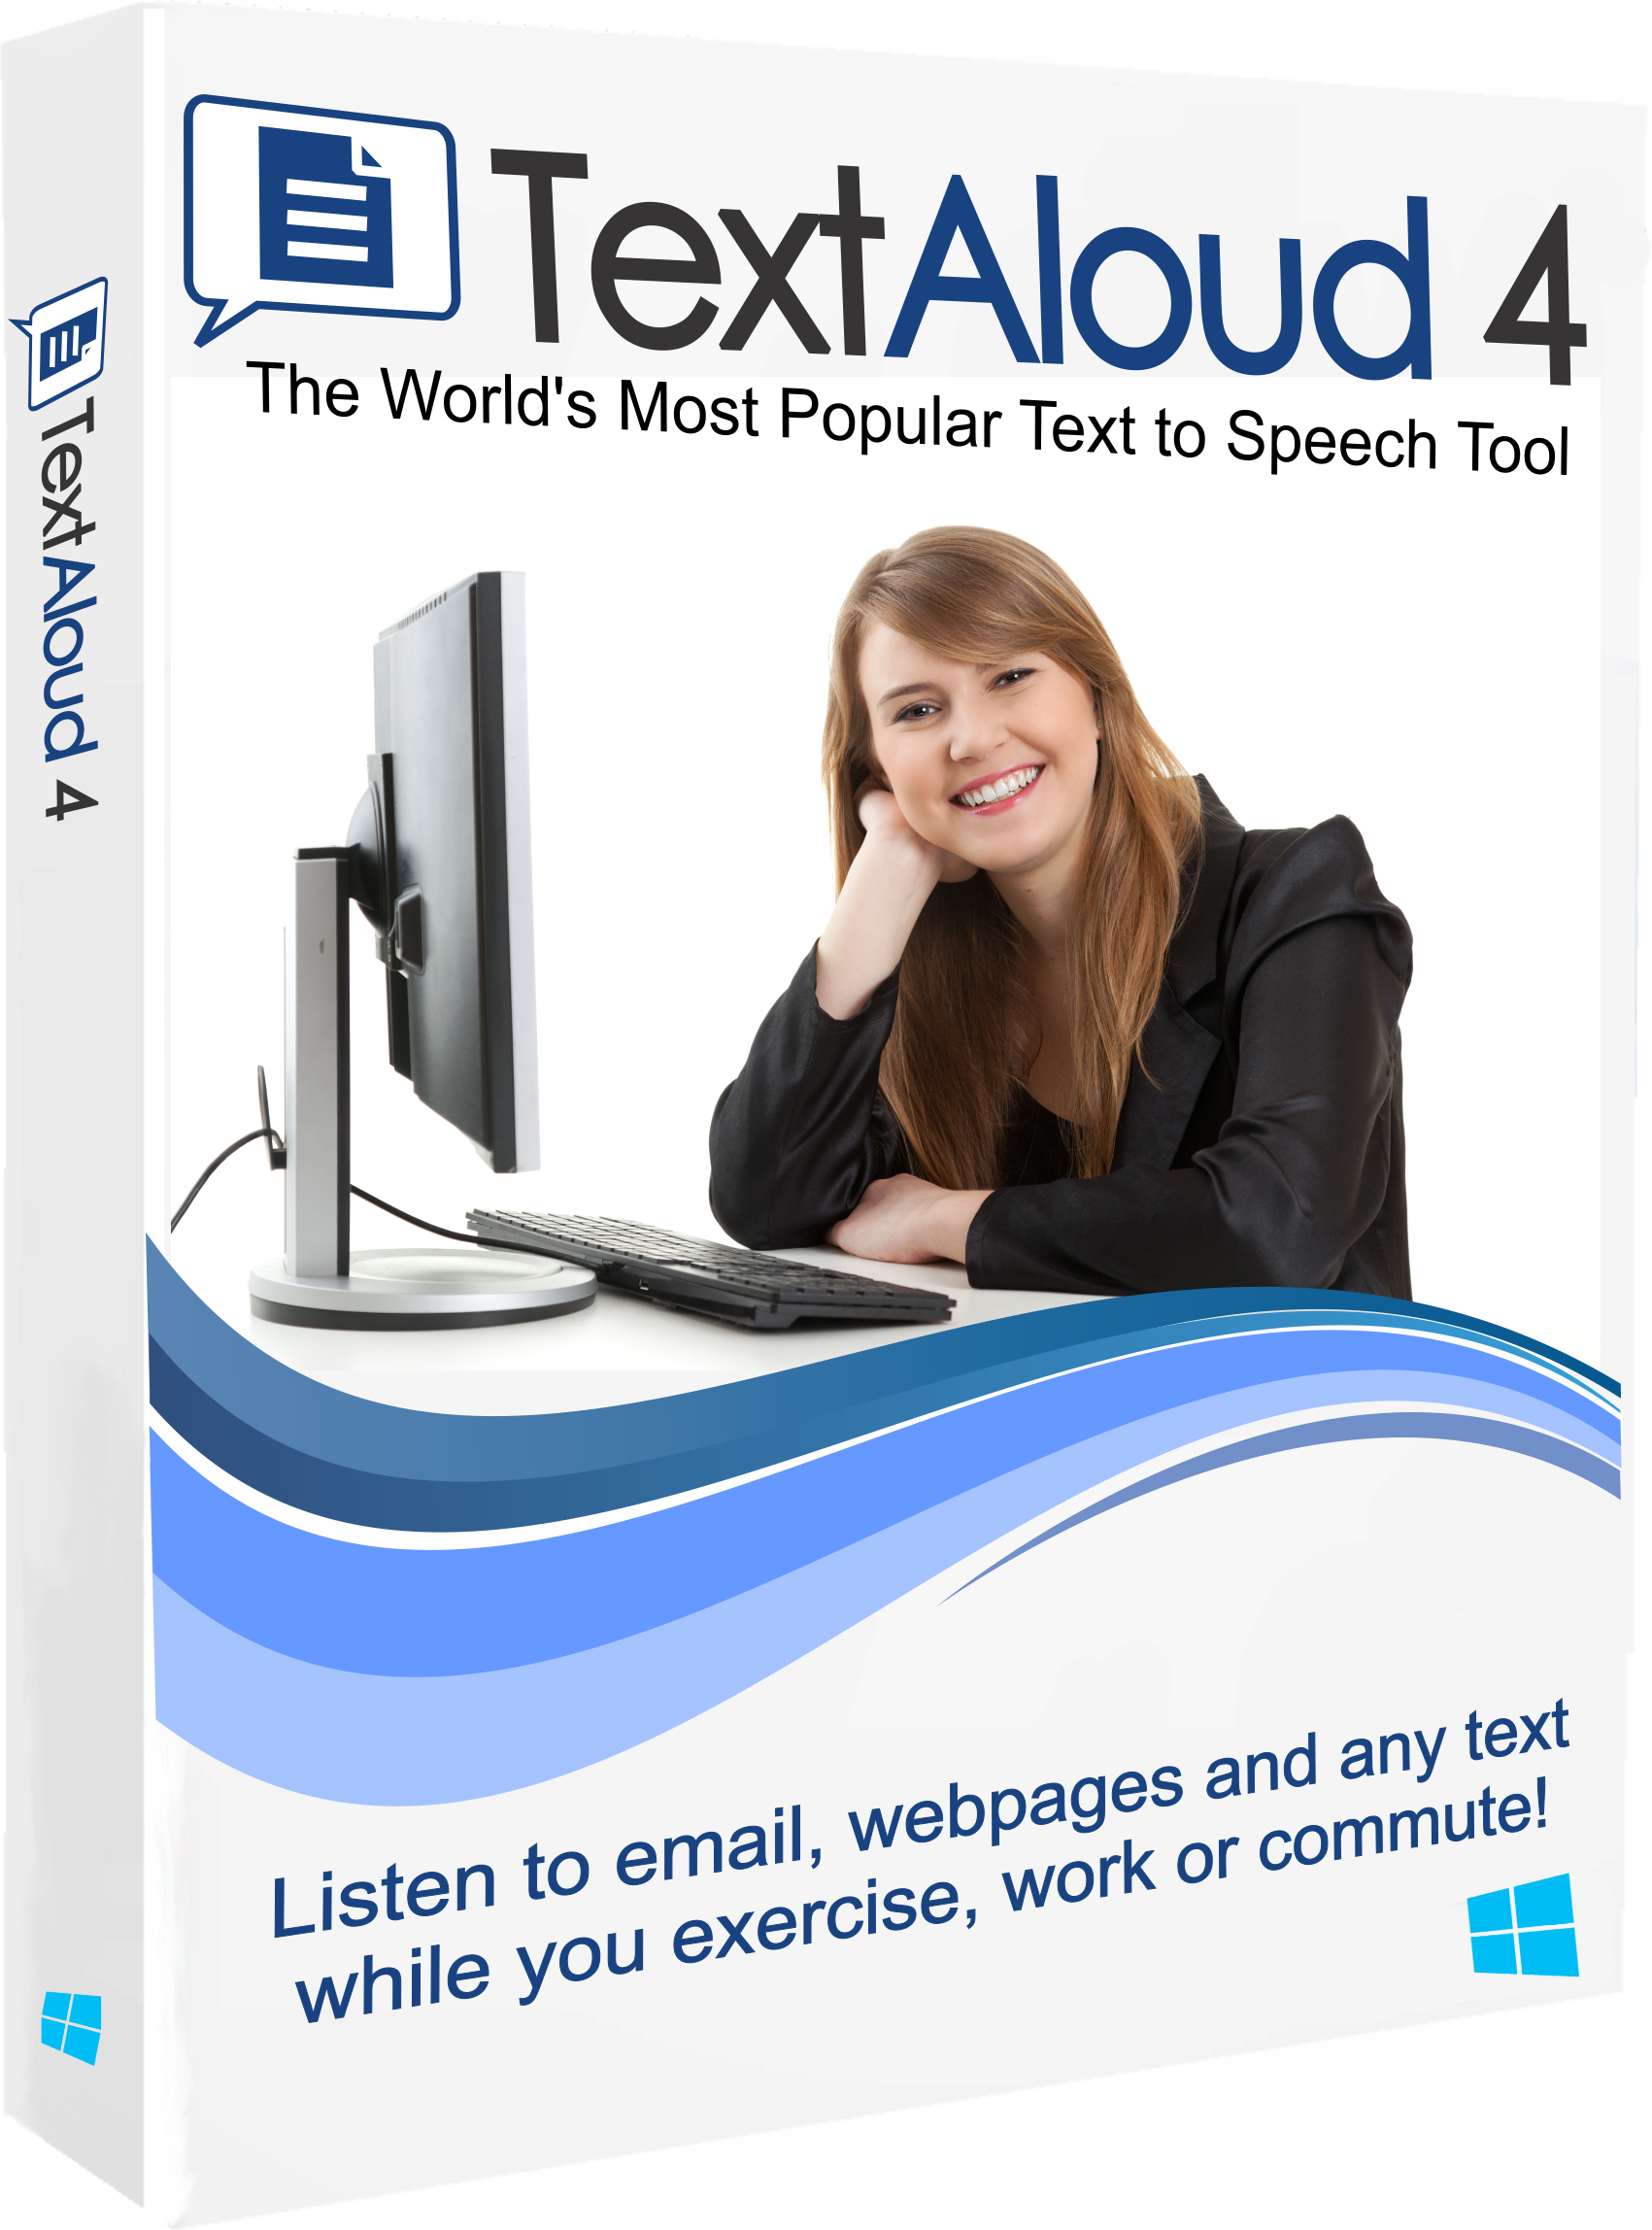 TextAloud 4’s completely new user interface, improved controls and added features provide an easy yet enhanced Text to Speech experience for both new and returning users.